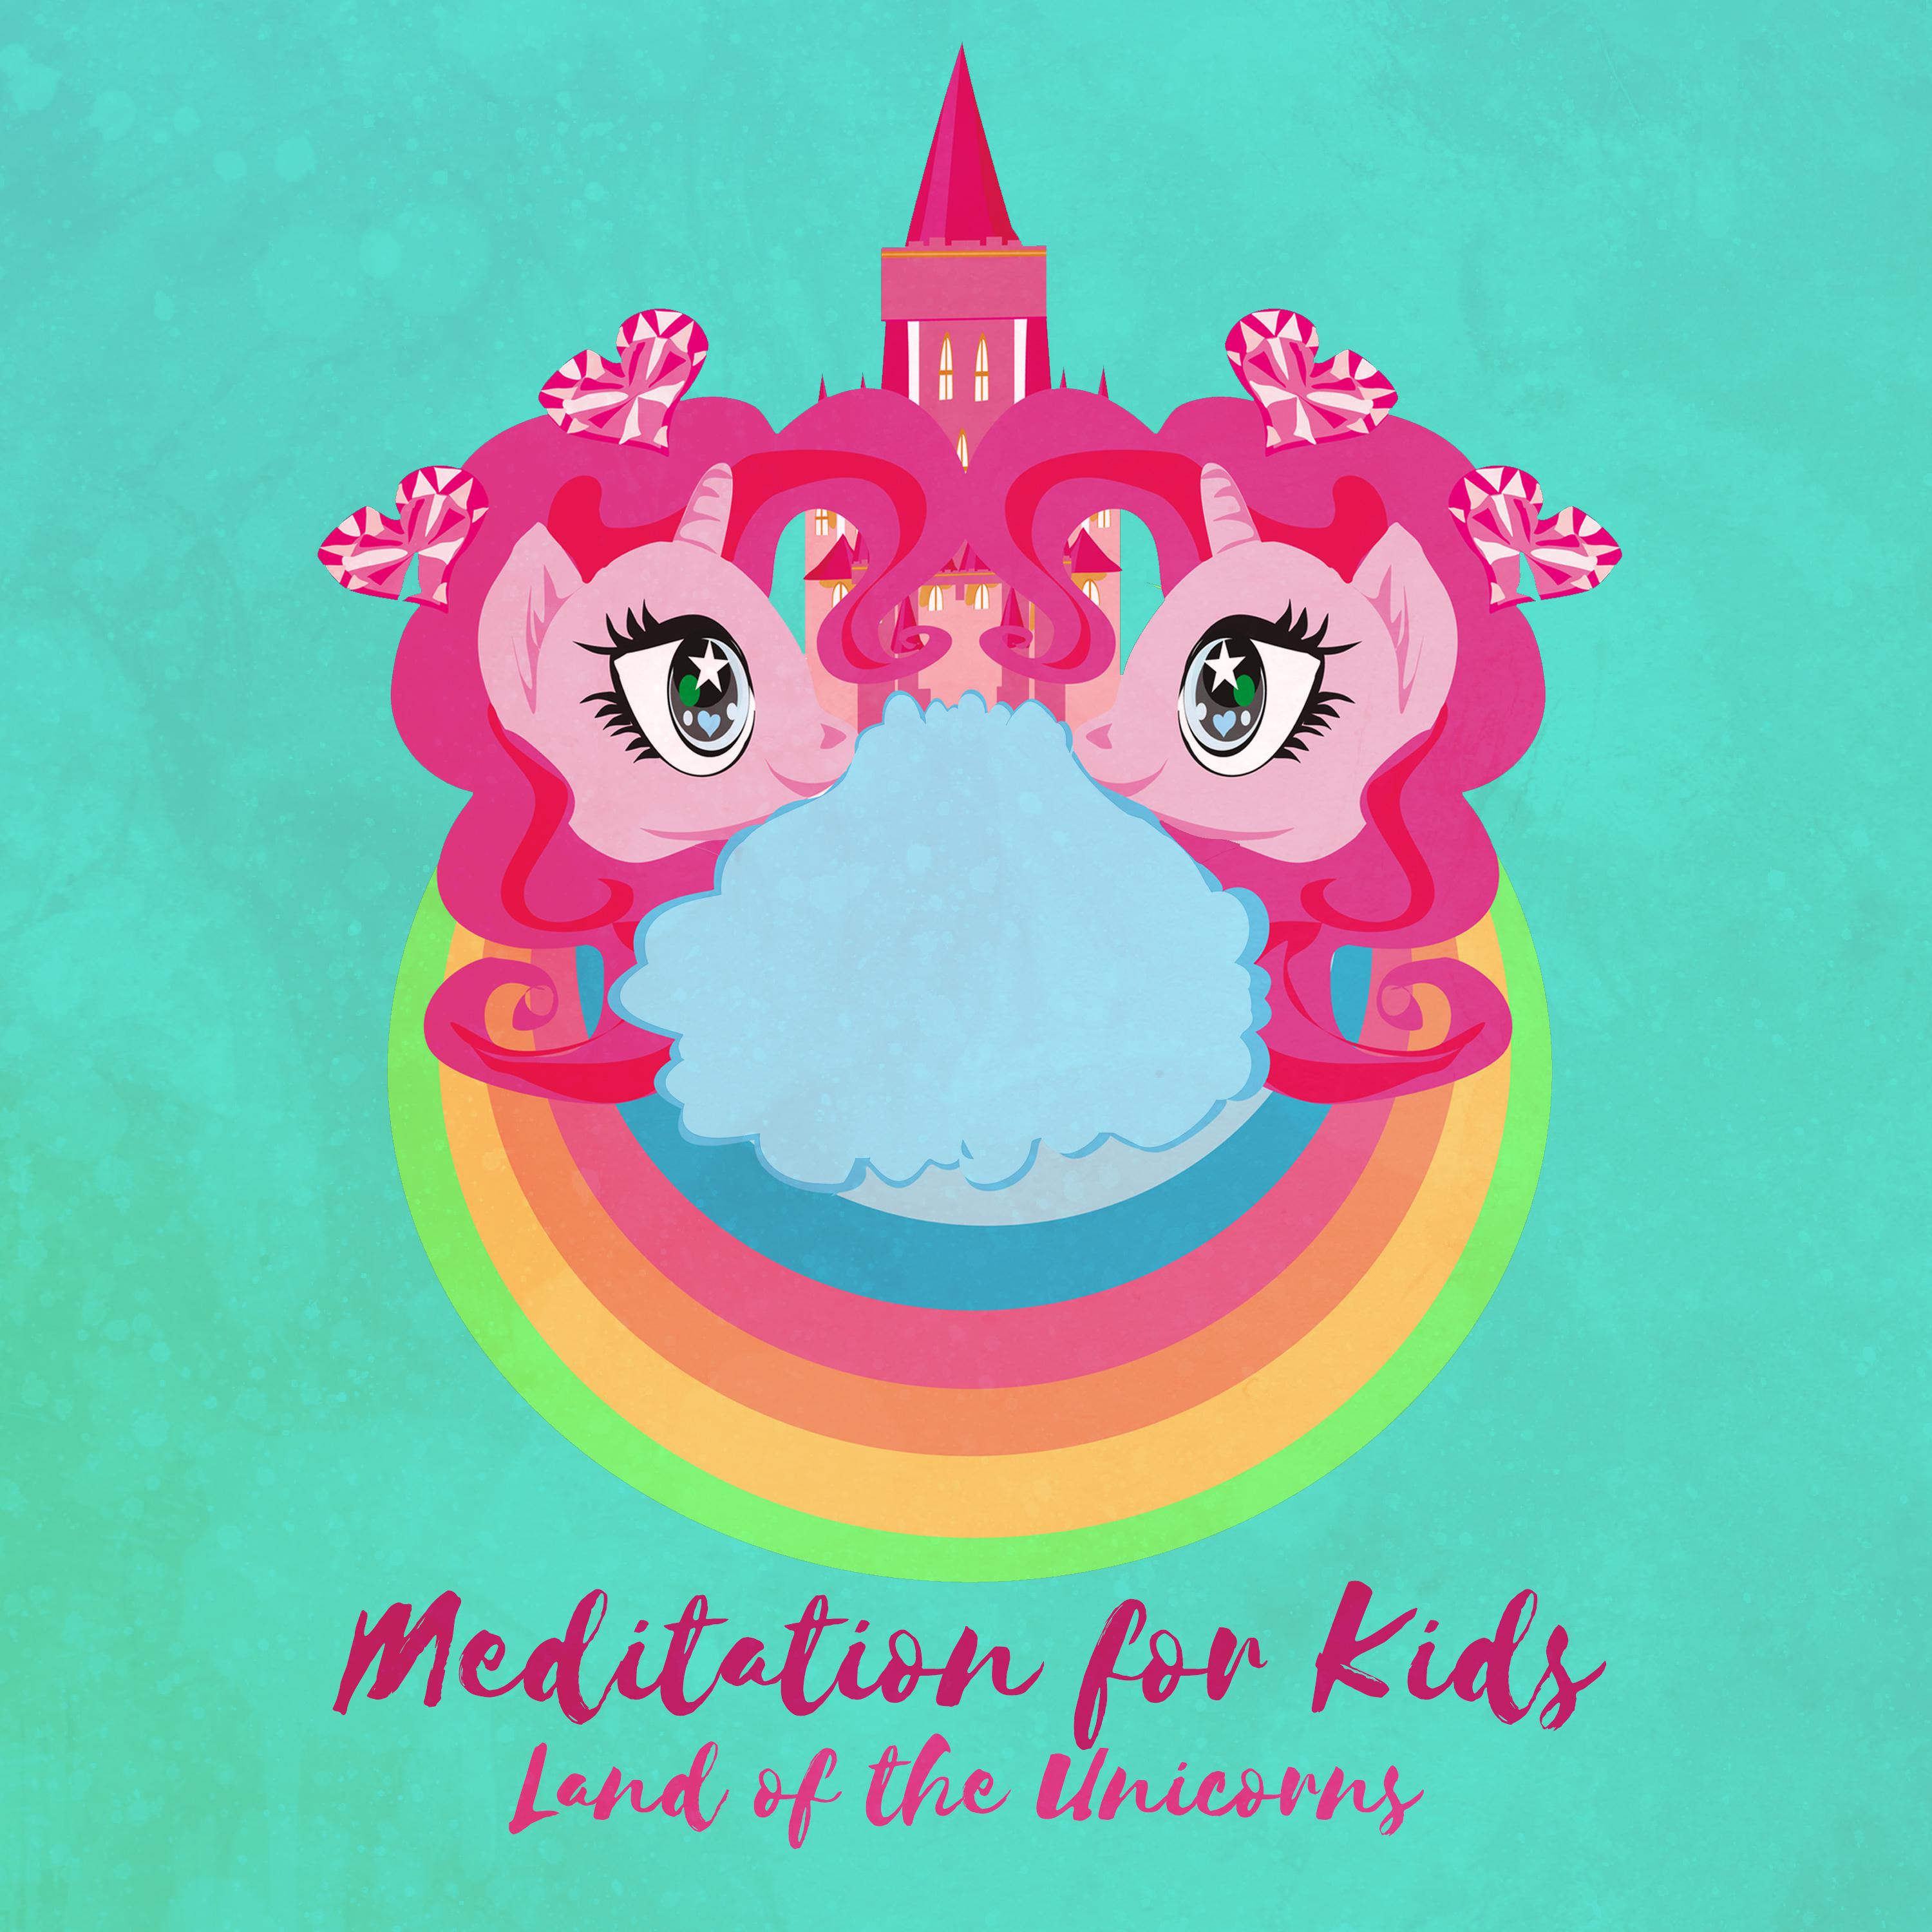 Meditation for Kids (Land of the Unicorns - Practice Self Love, Bedtime Sleep Story, Children Relaxation, Happiness)